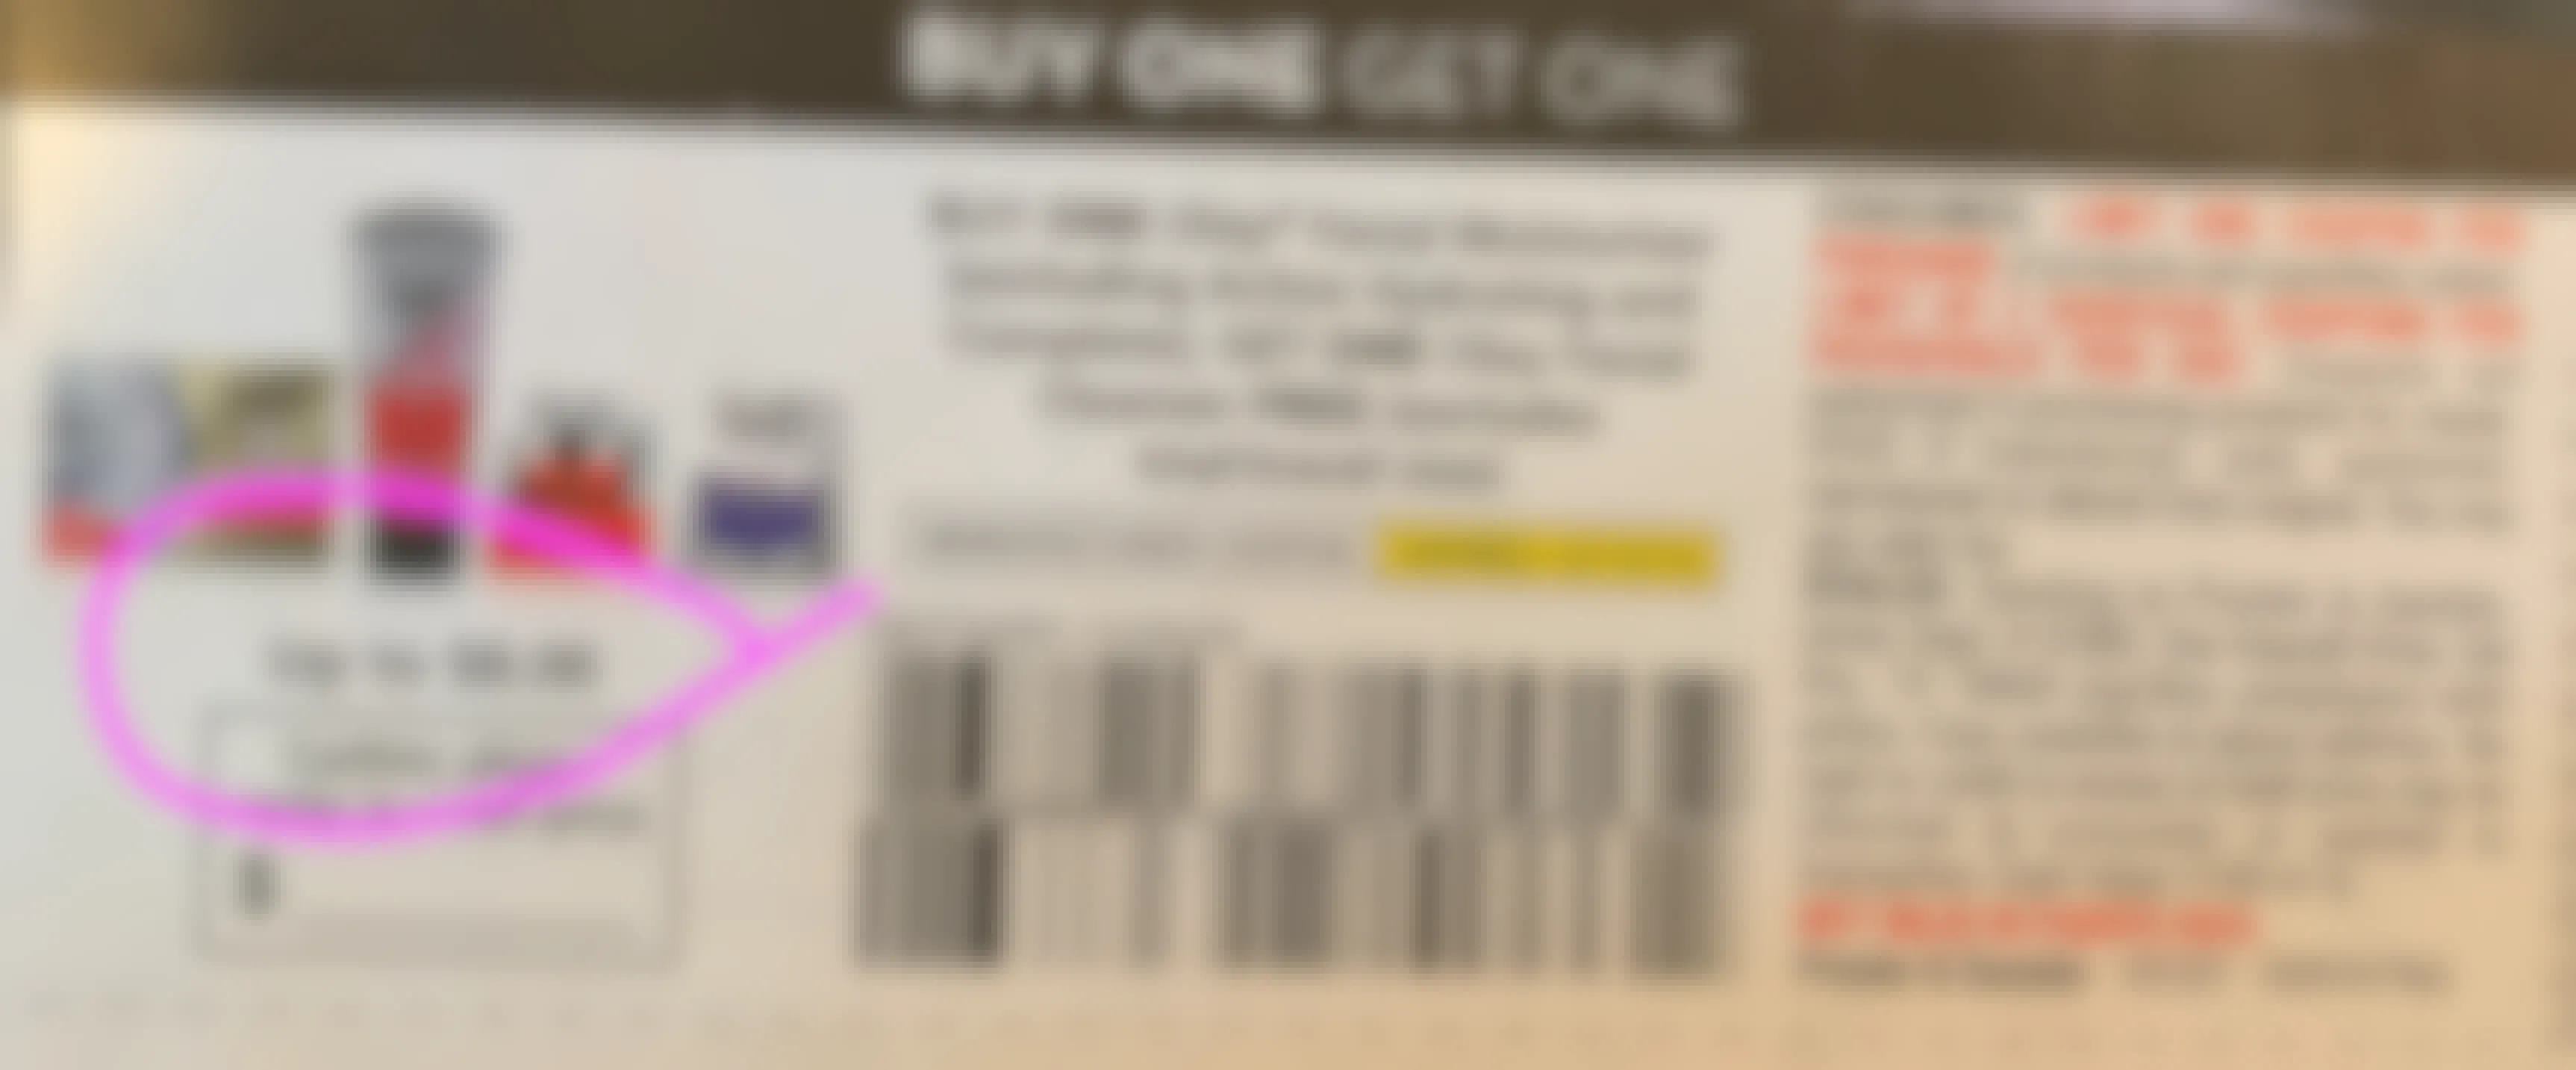 A manufacturer coupon from Olay for a buy one get one deal for up to $8.00